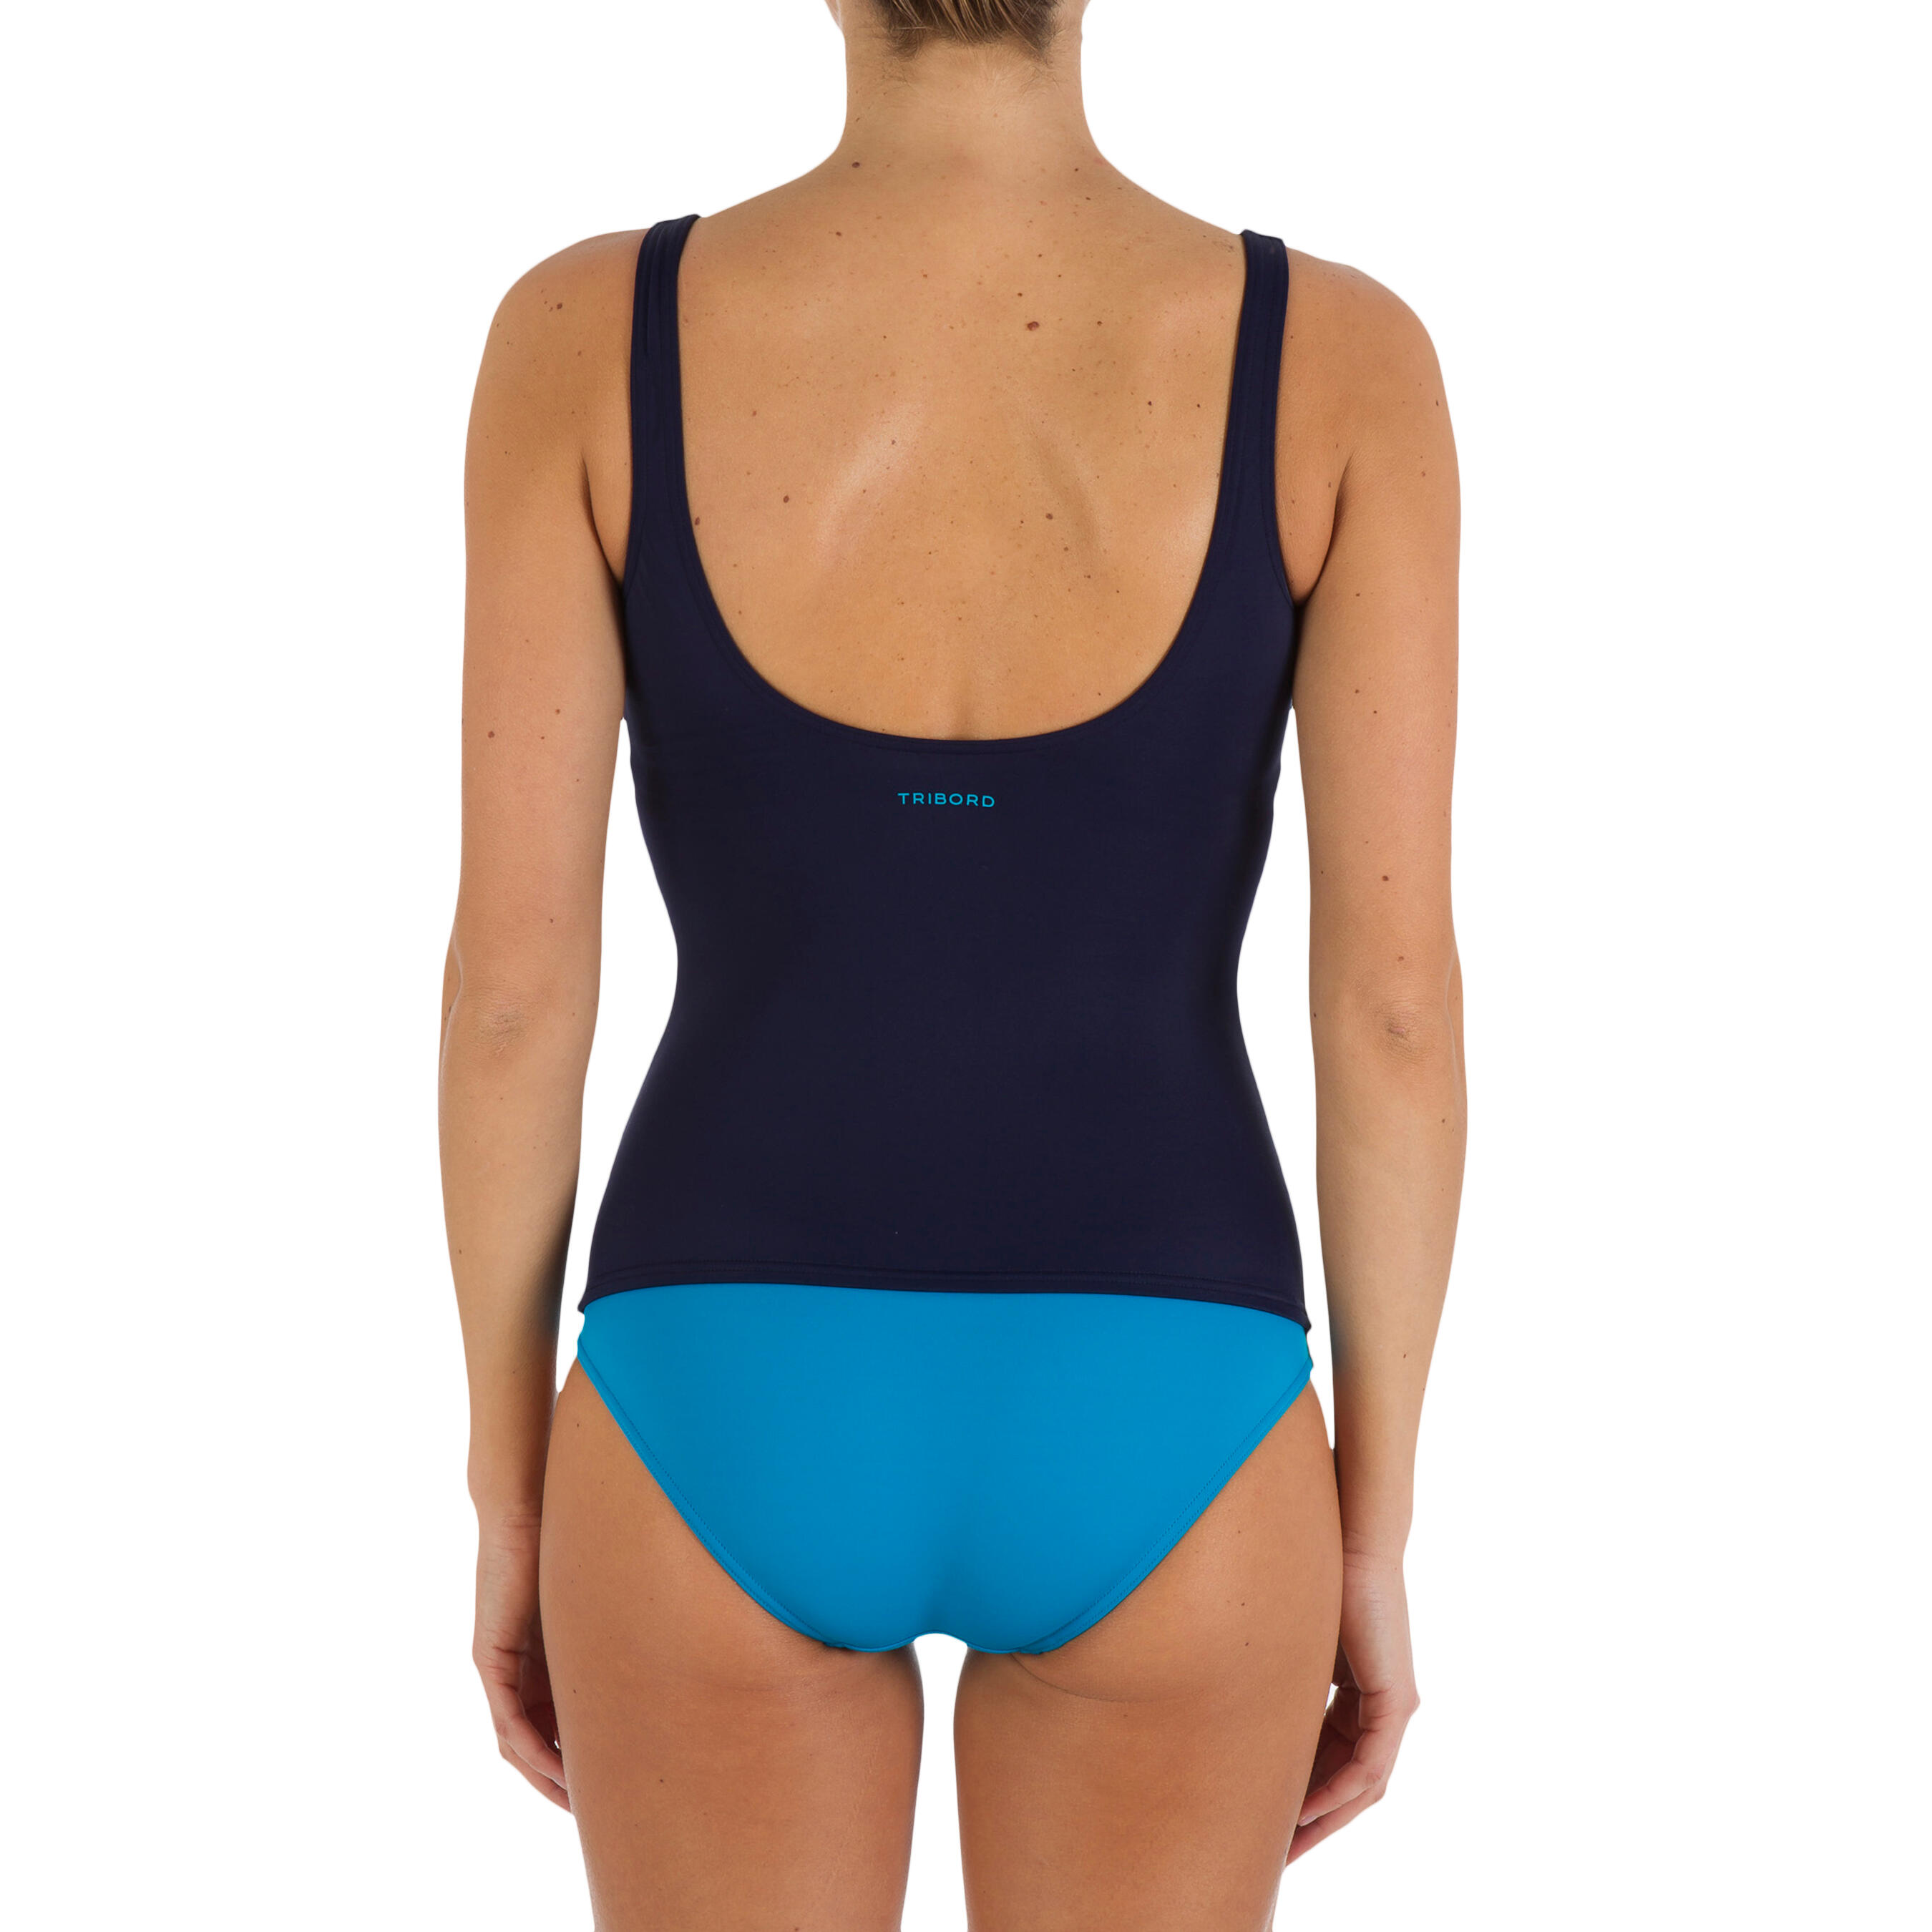 Doli Women's One-Piece Swimsuit 360° Built-In Bra & Fixed Padded Cups - Blue 5/8